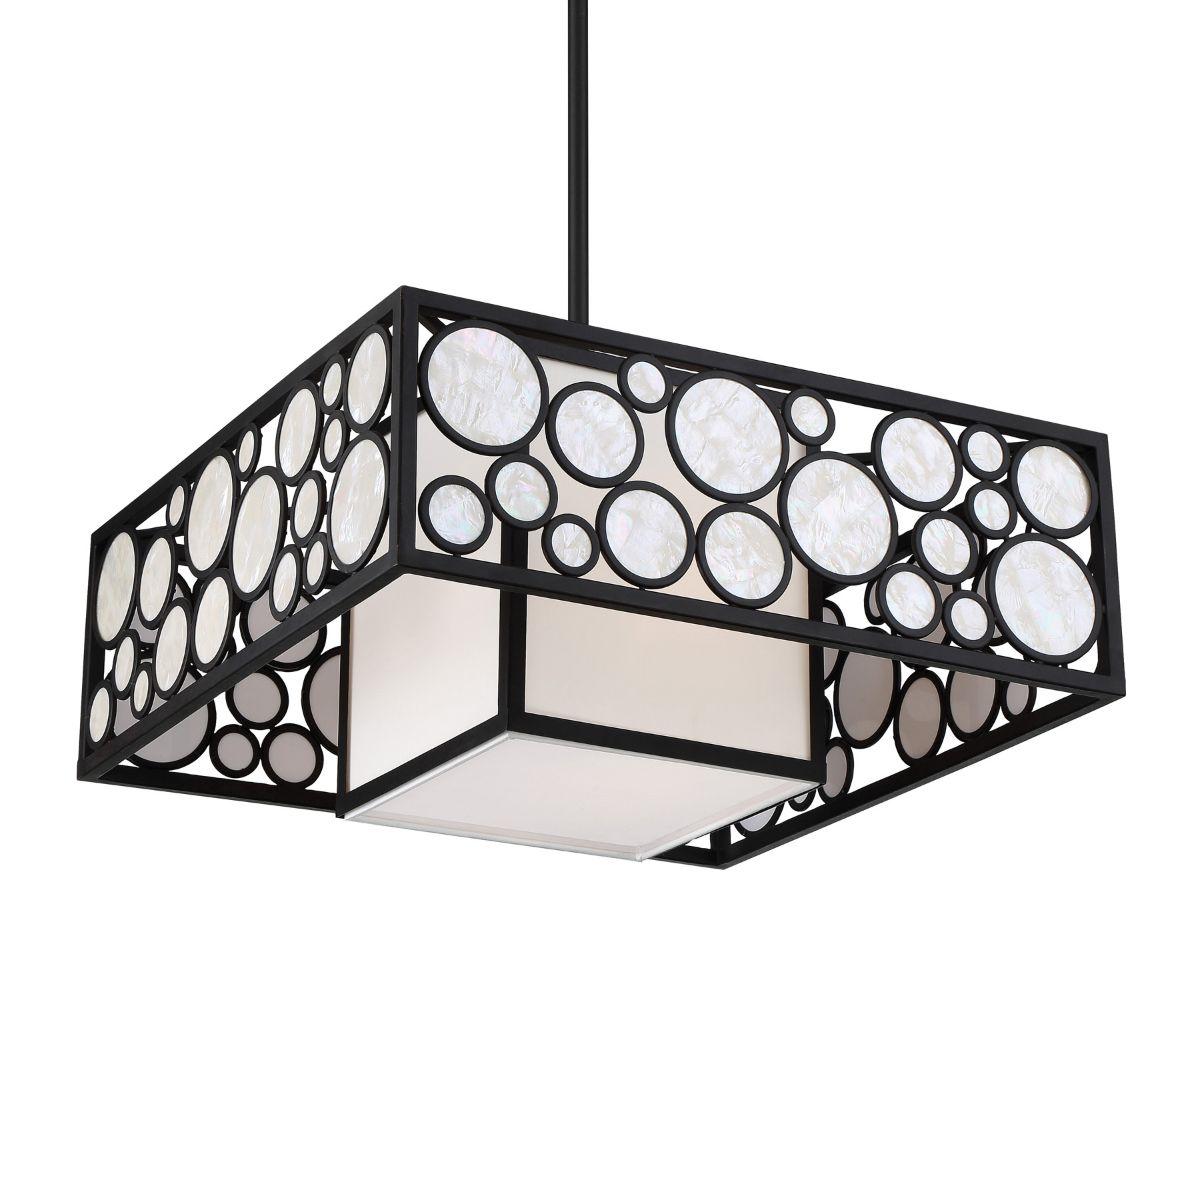 Mosaic 21 in. 2 lights Pendant Light Oil Rubbed Bronze Finish